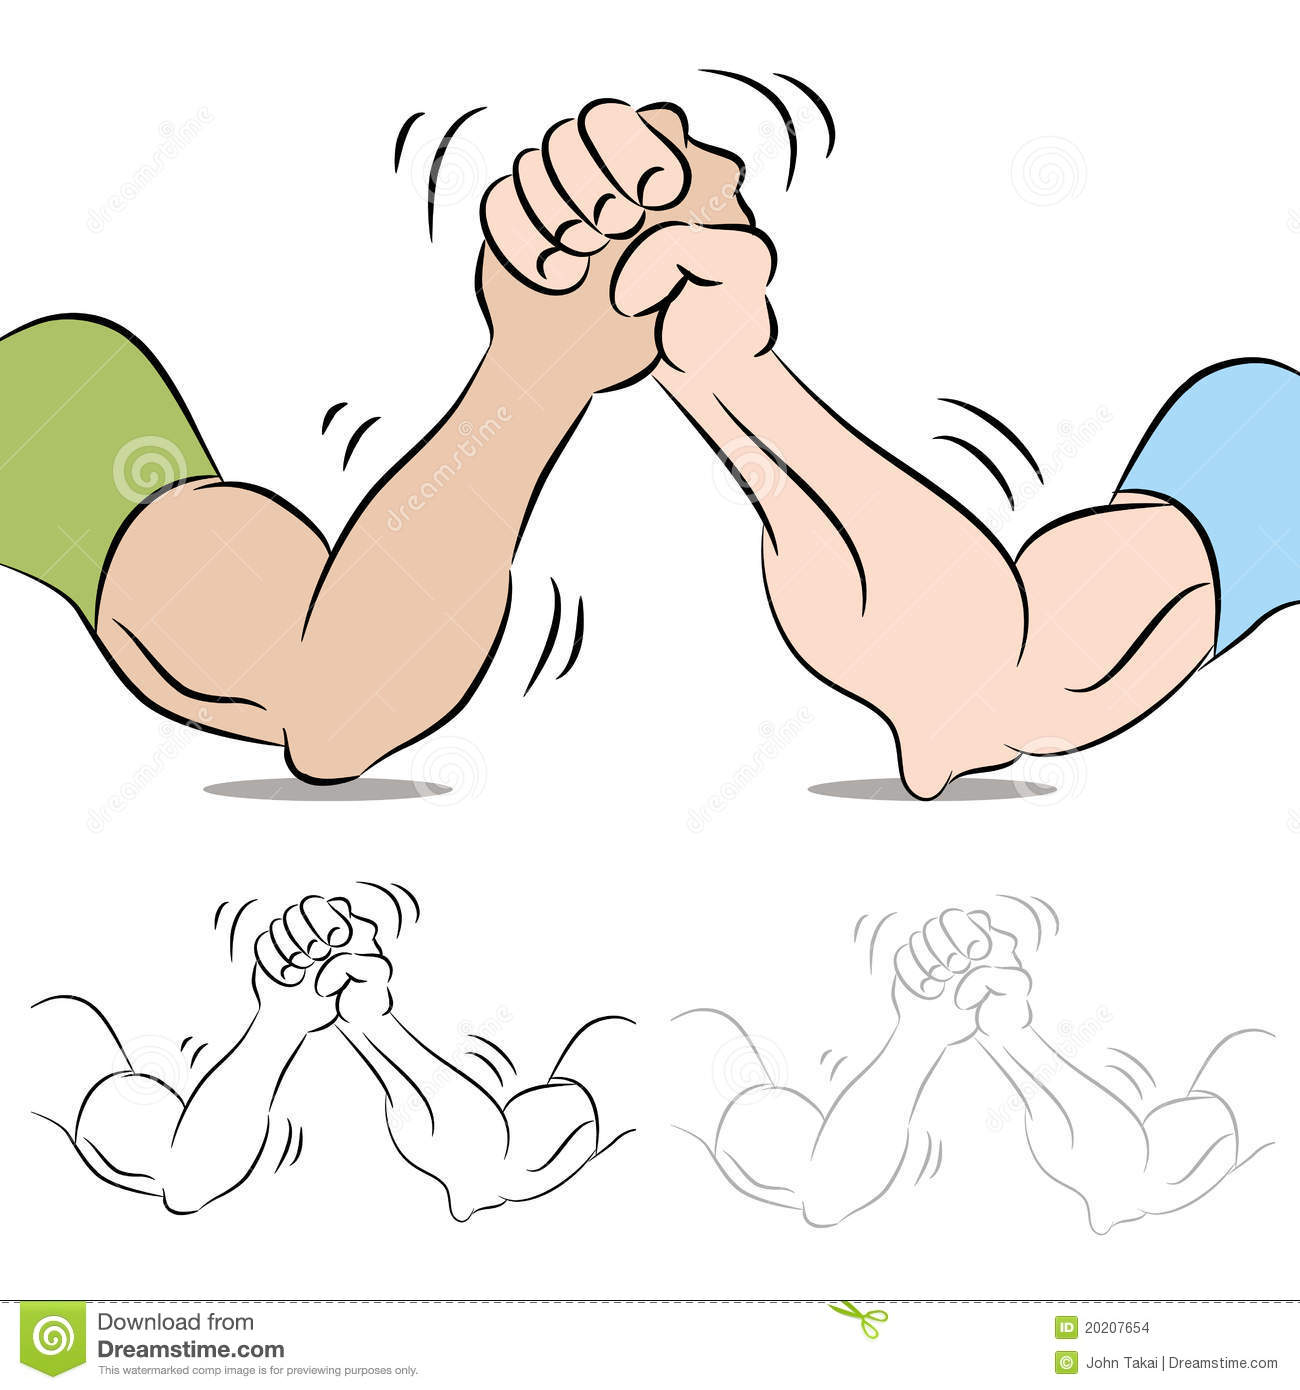 An Image Of A Two People Arm Wrestling 